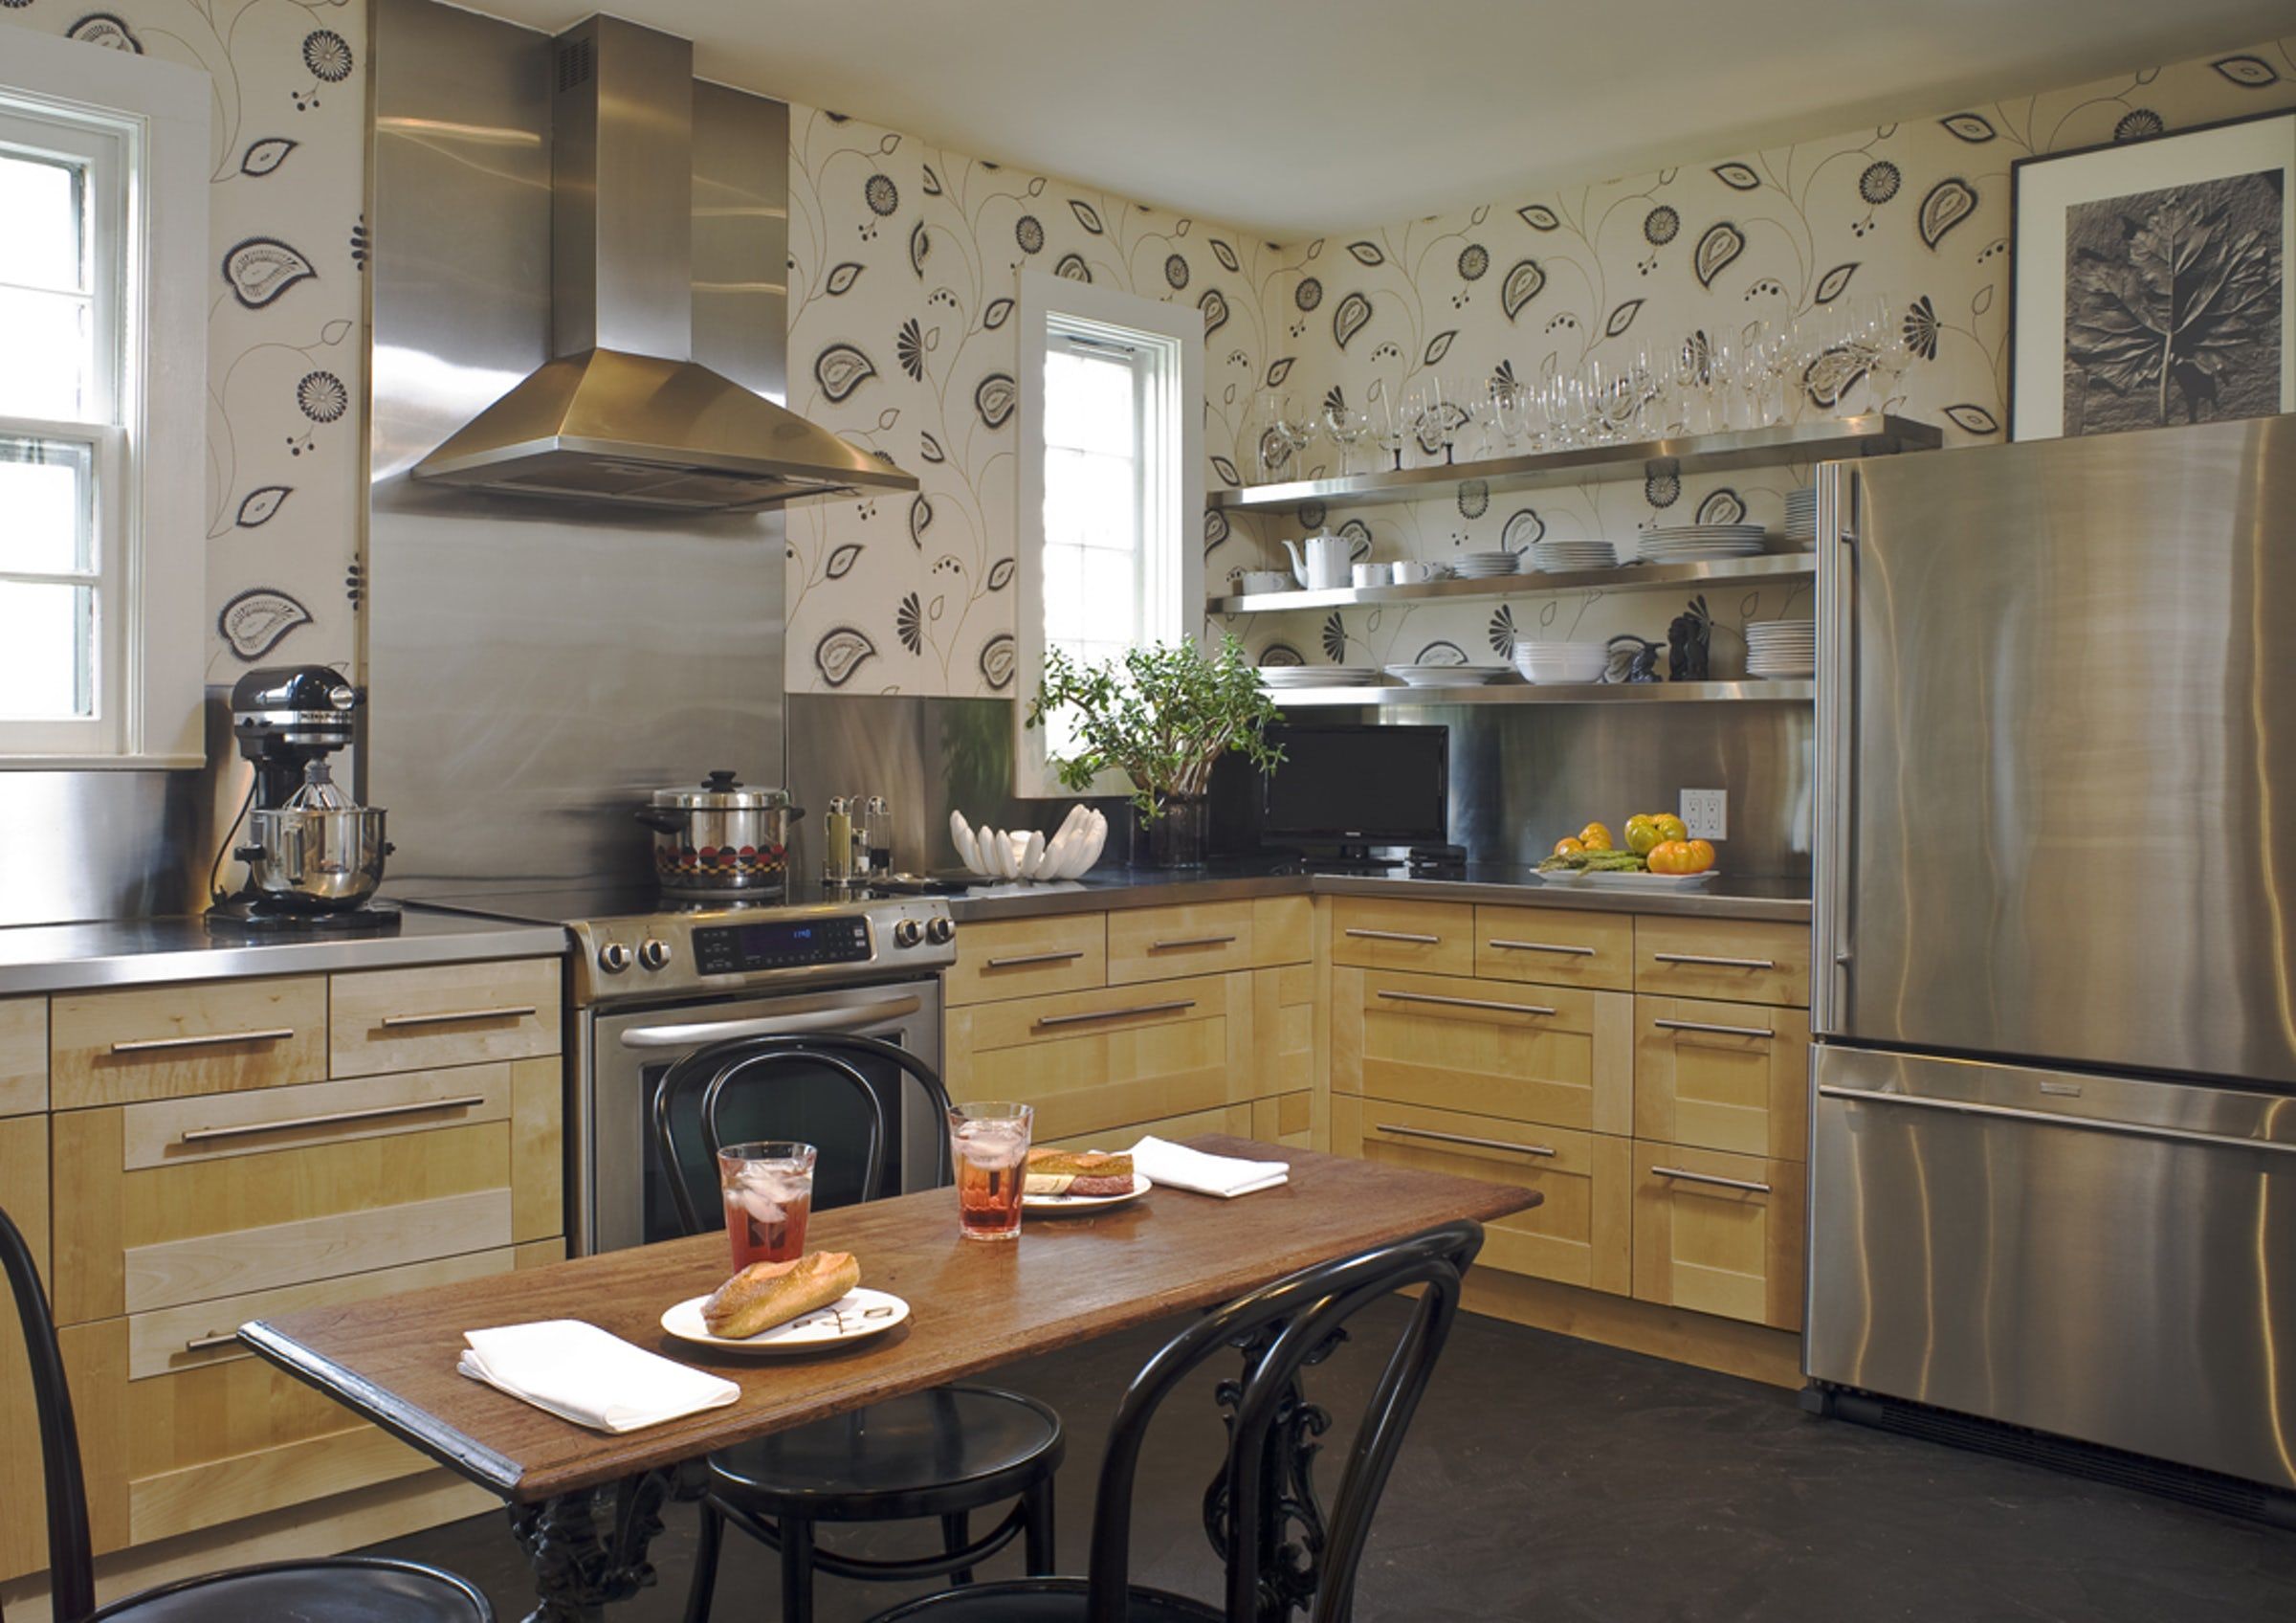 Colorful paisley Kitchen Wallpaper  TenStickers